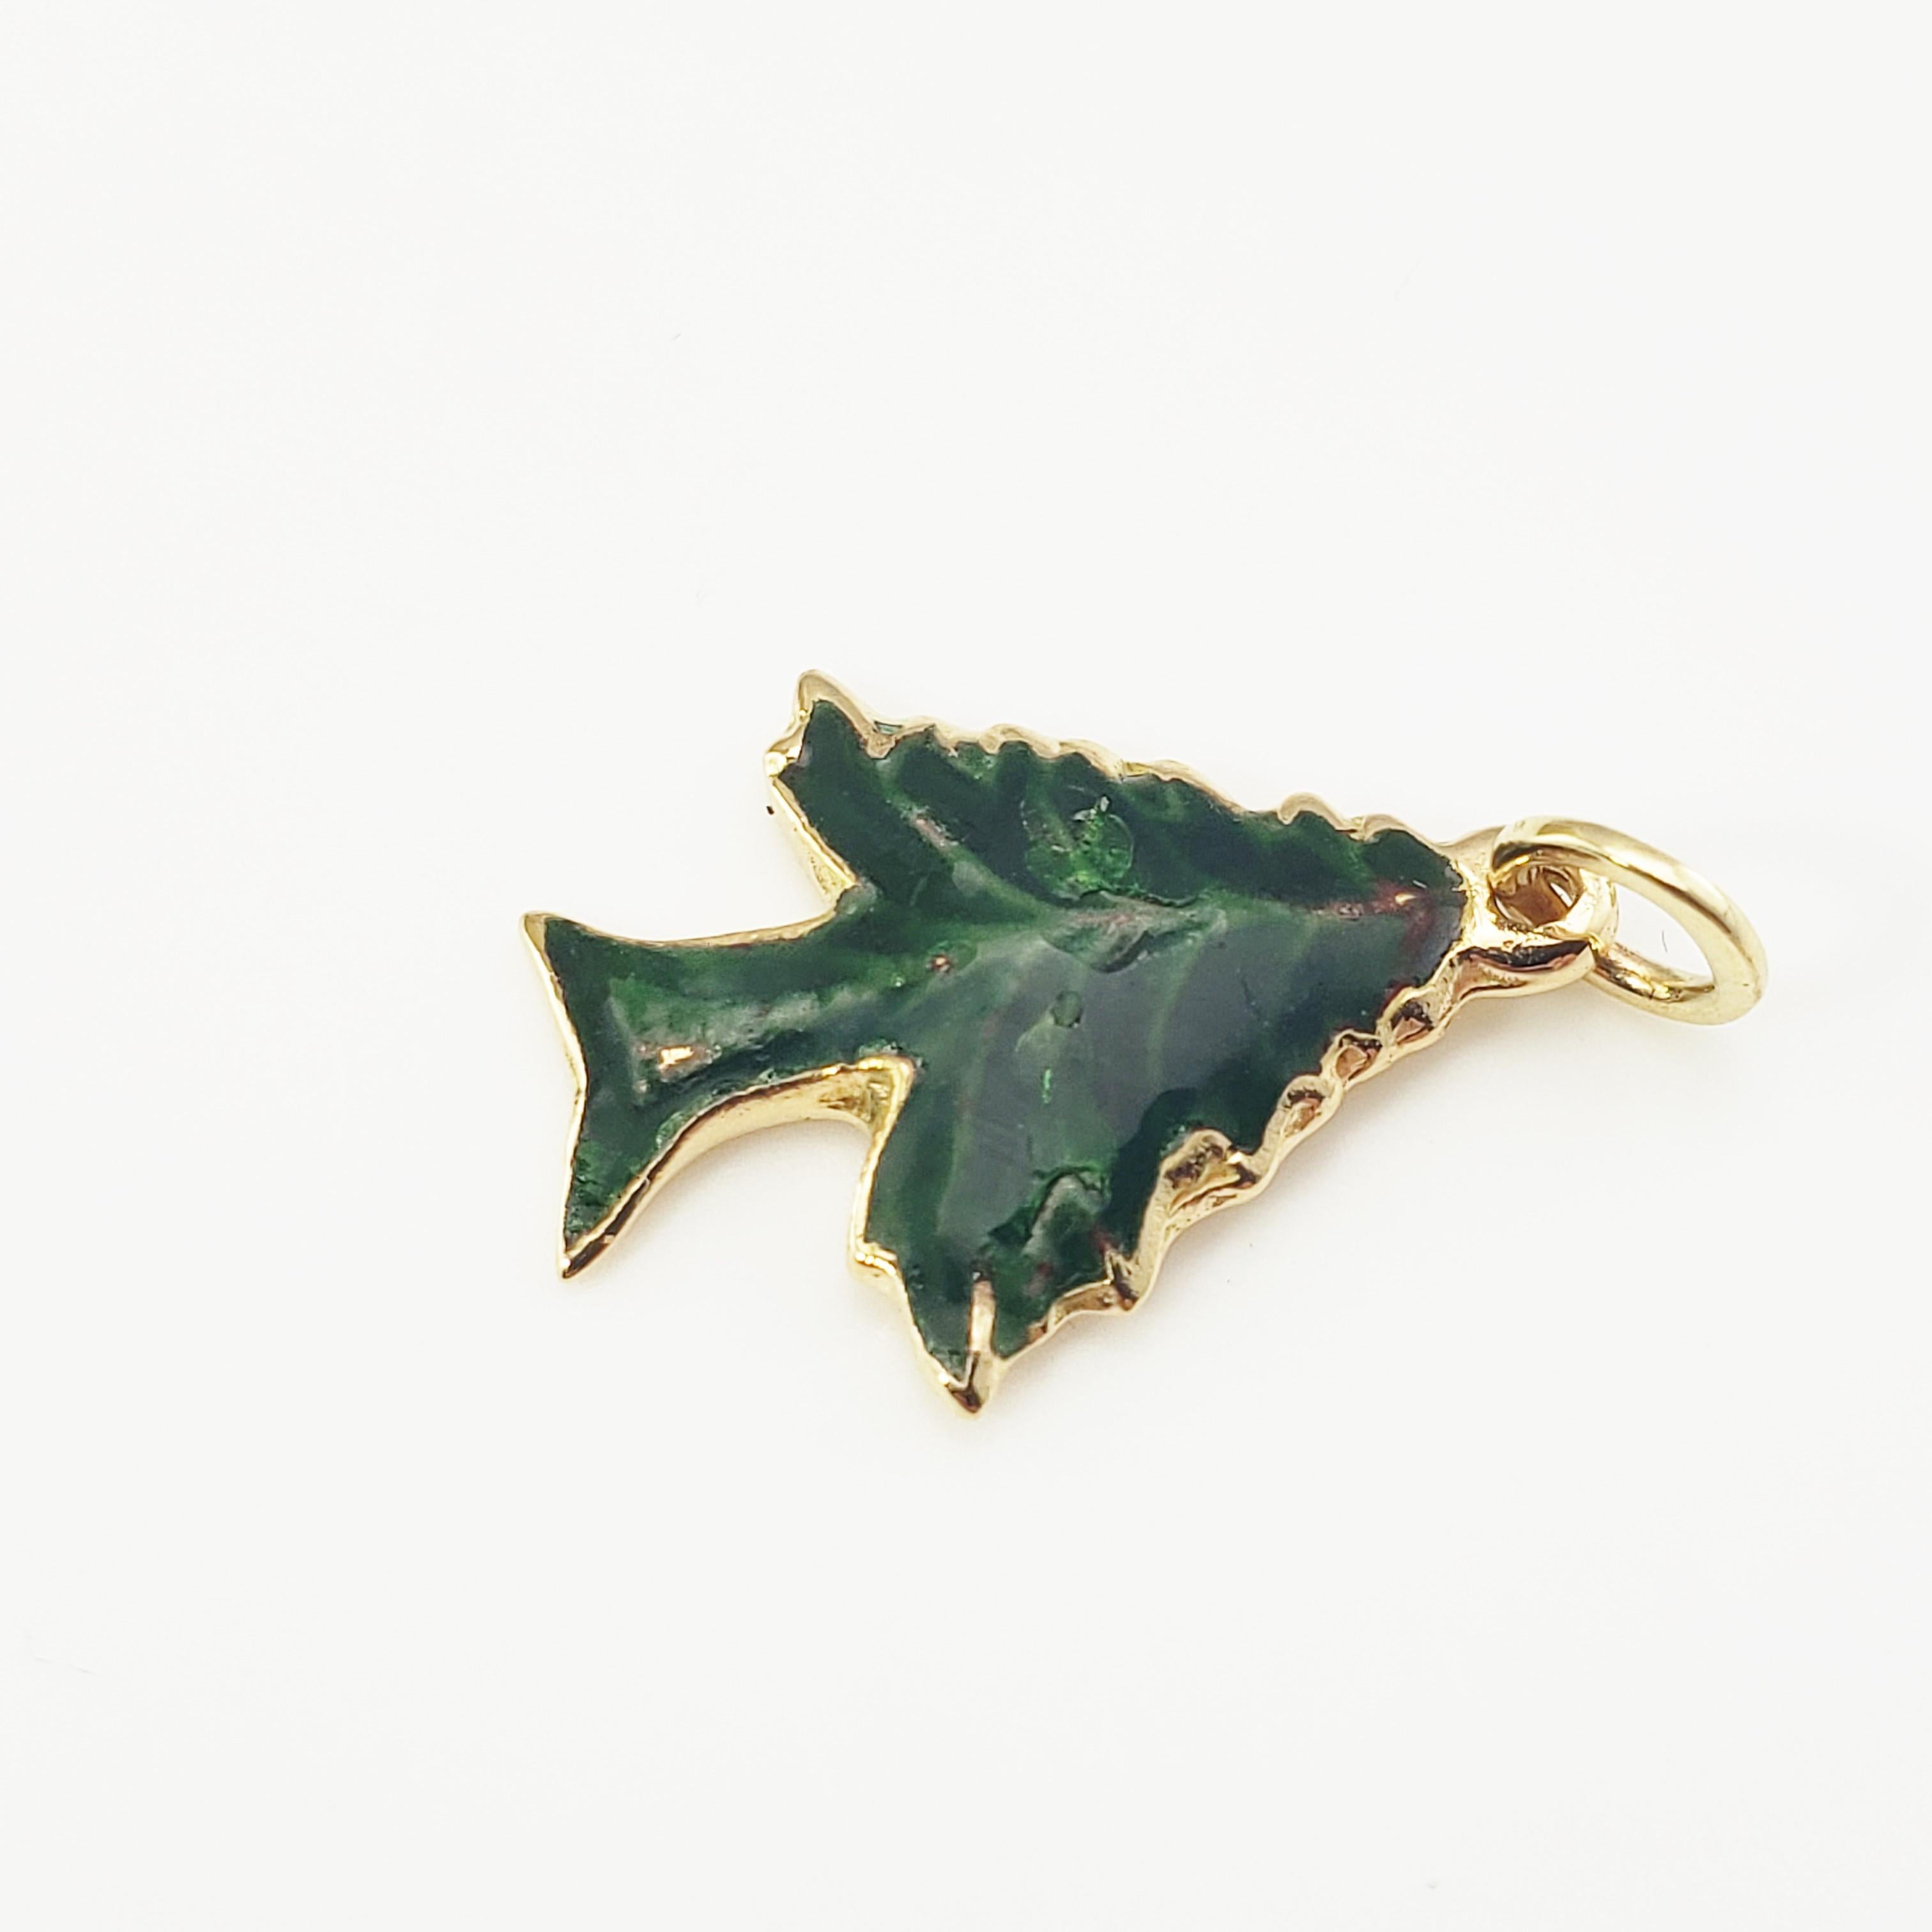 14 Karat Yellow Gold and Enamel Christmas Tree Charm-

'Tis the season!

This lovely charm features a miniature holiday tree accented with green enamel.

Size:  16 mm x  13 mm (actual charm)

Weight:  0.6 dwt. /  1.1 gr.

Stamped: 14K

*Chain not